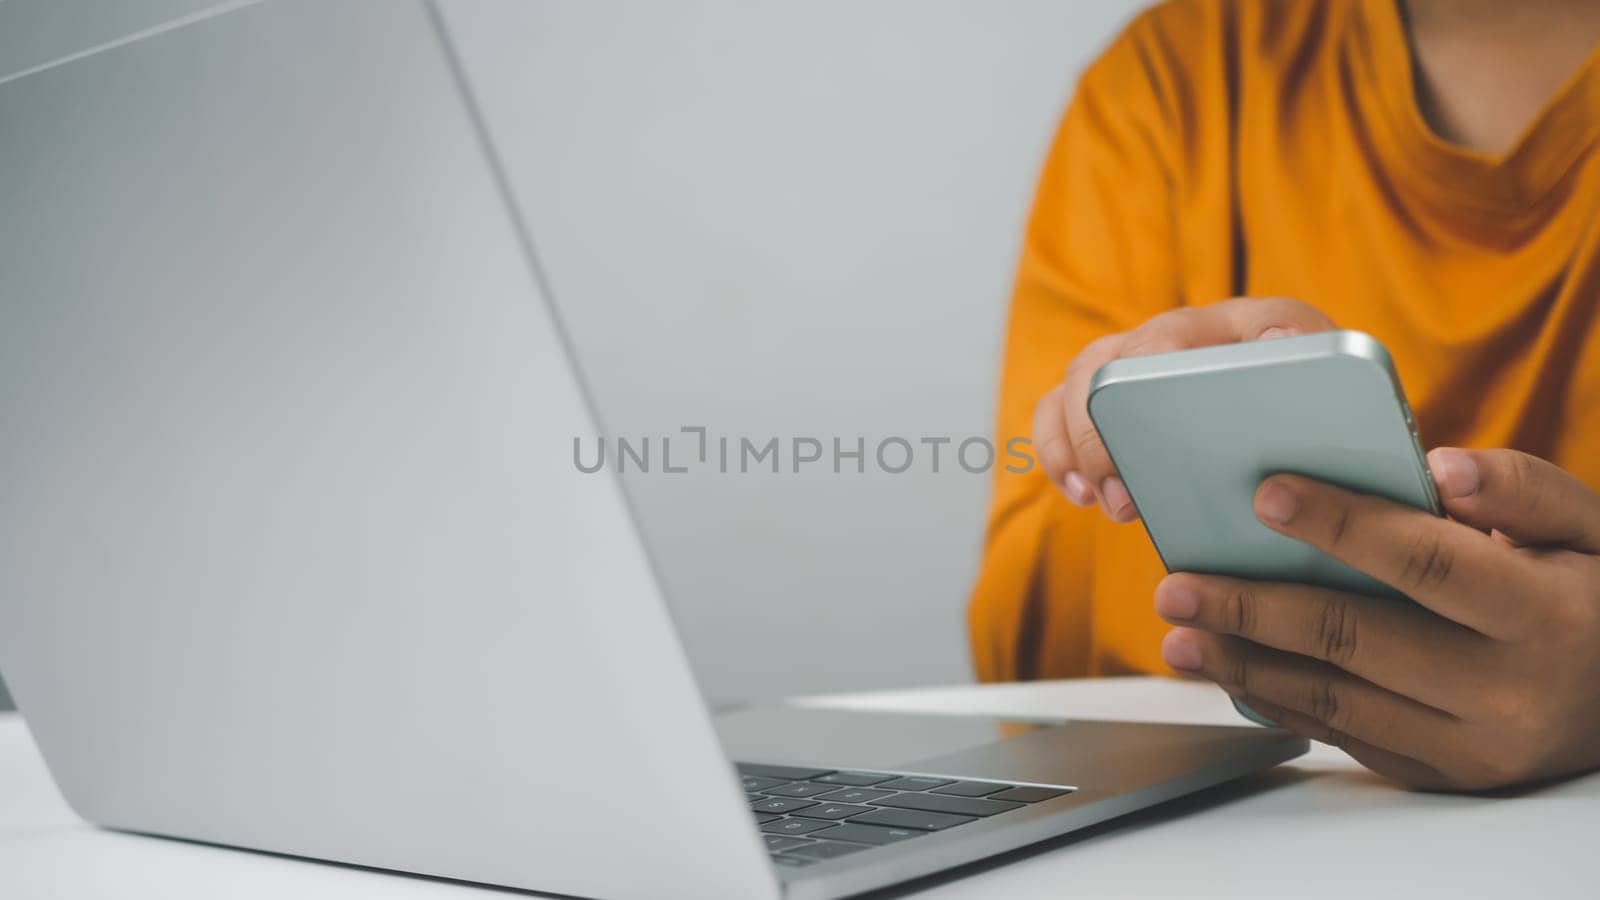 Human uses smartphone to check new mail. New email notification concept for business email communication and digital marketing. The inbox receives electronic message notifications. internet technology by Unimages2527